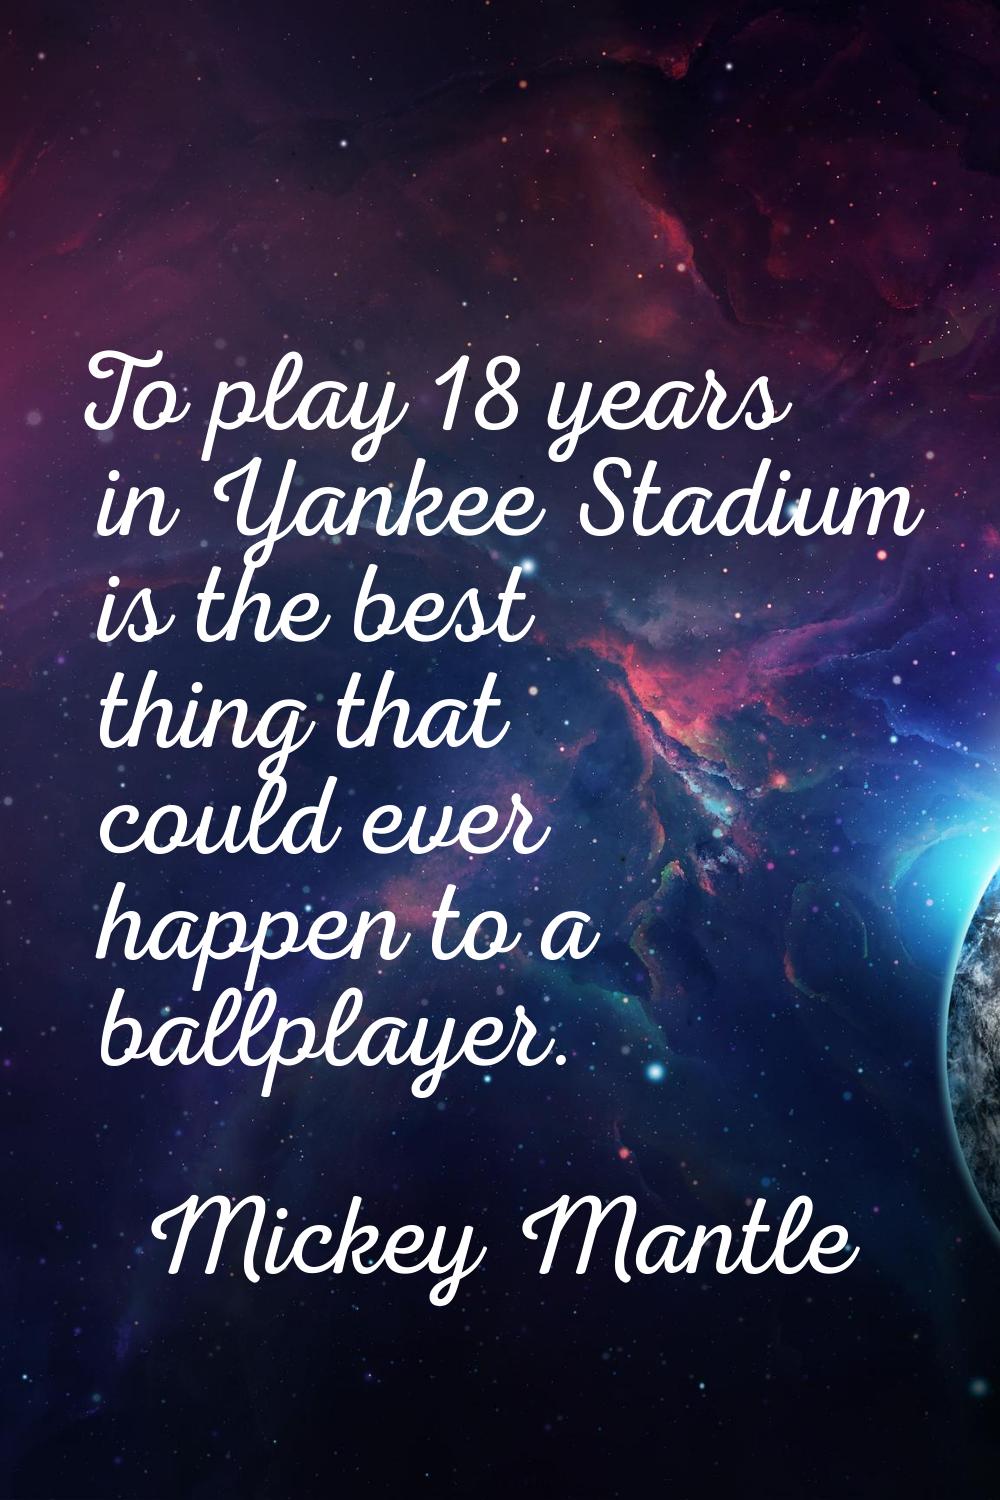 To play 18 years in Yankee Stadium is the best thing that could ever happen to a ballplayer.